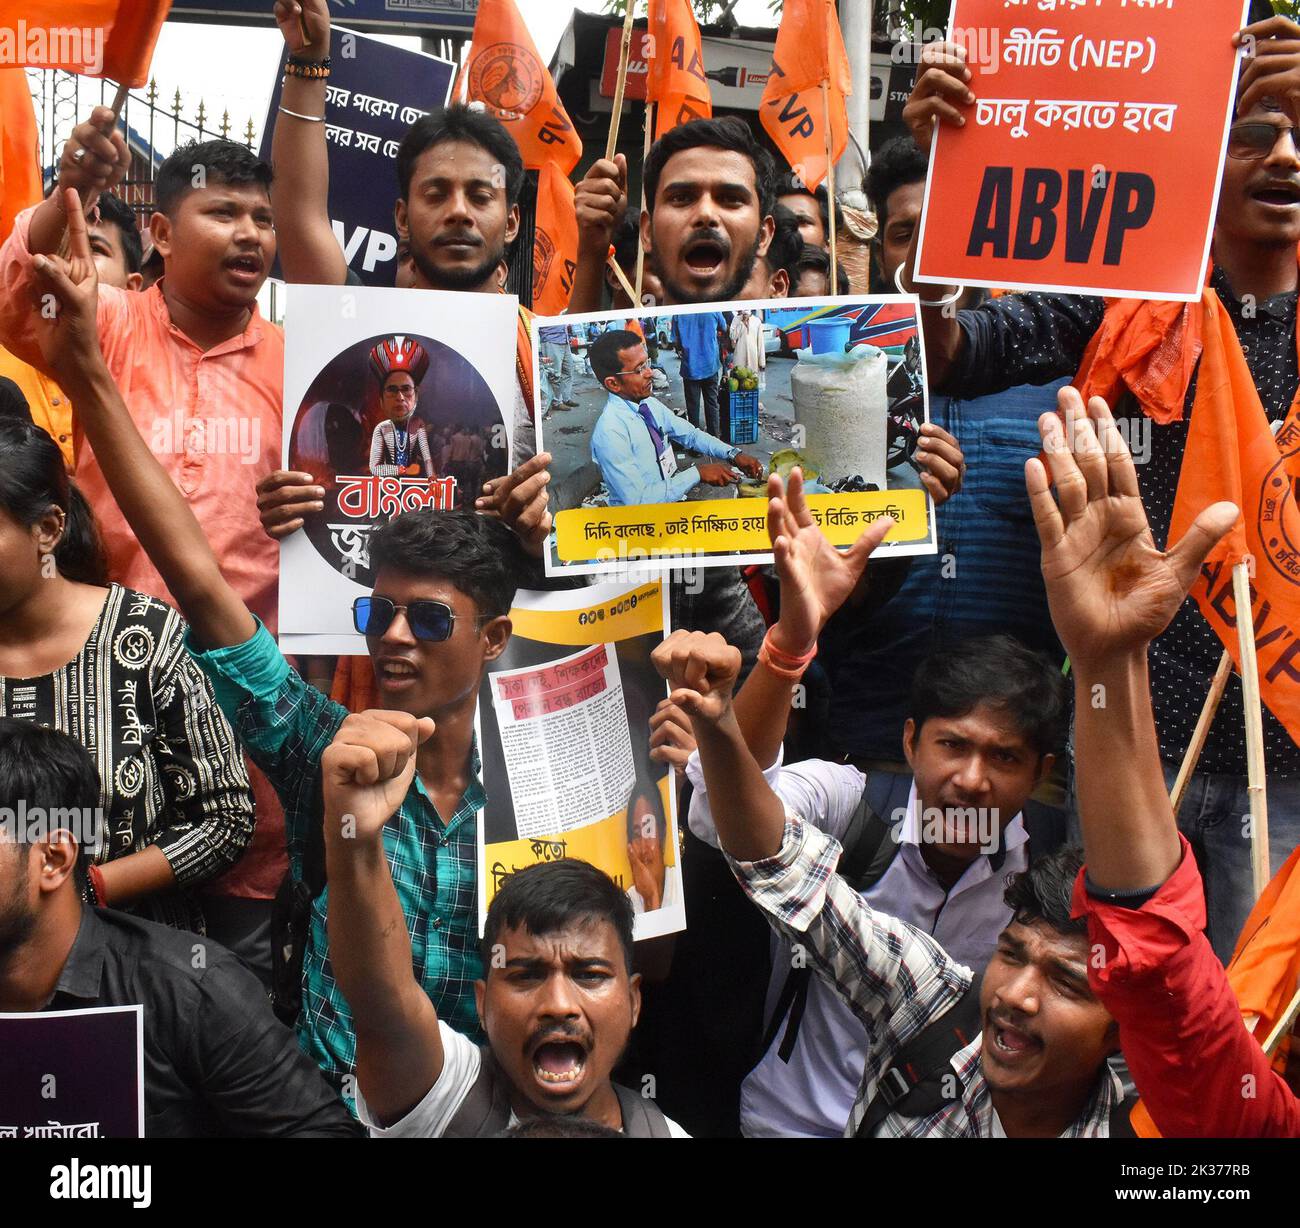 Abvp hi-res stock photography and images - Alamy